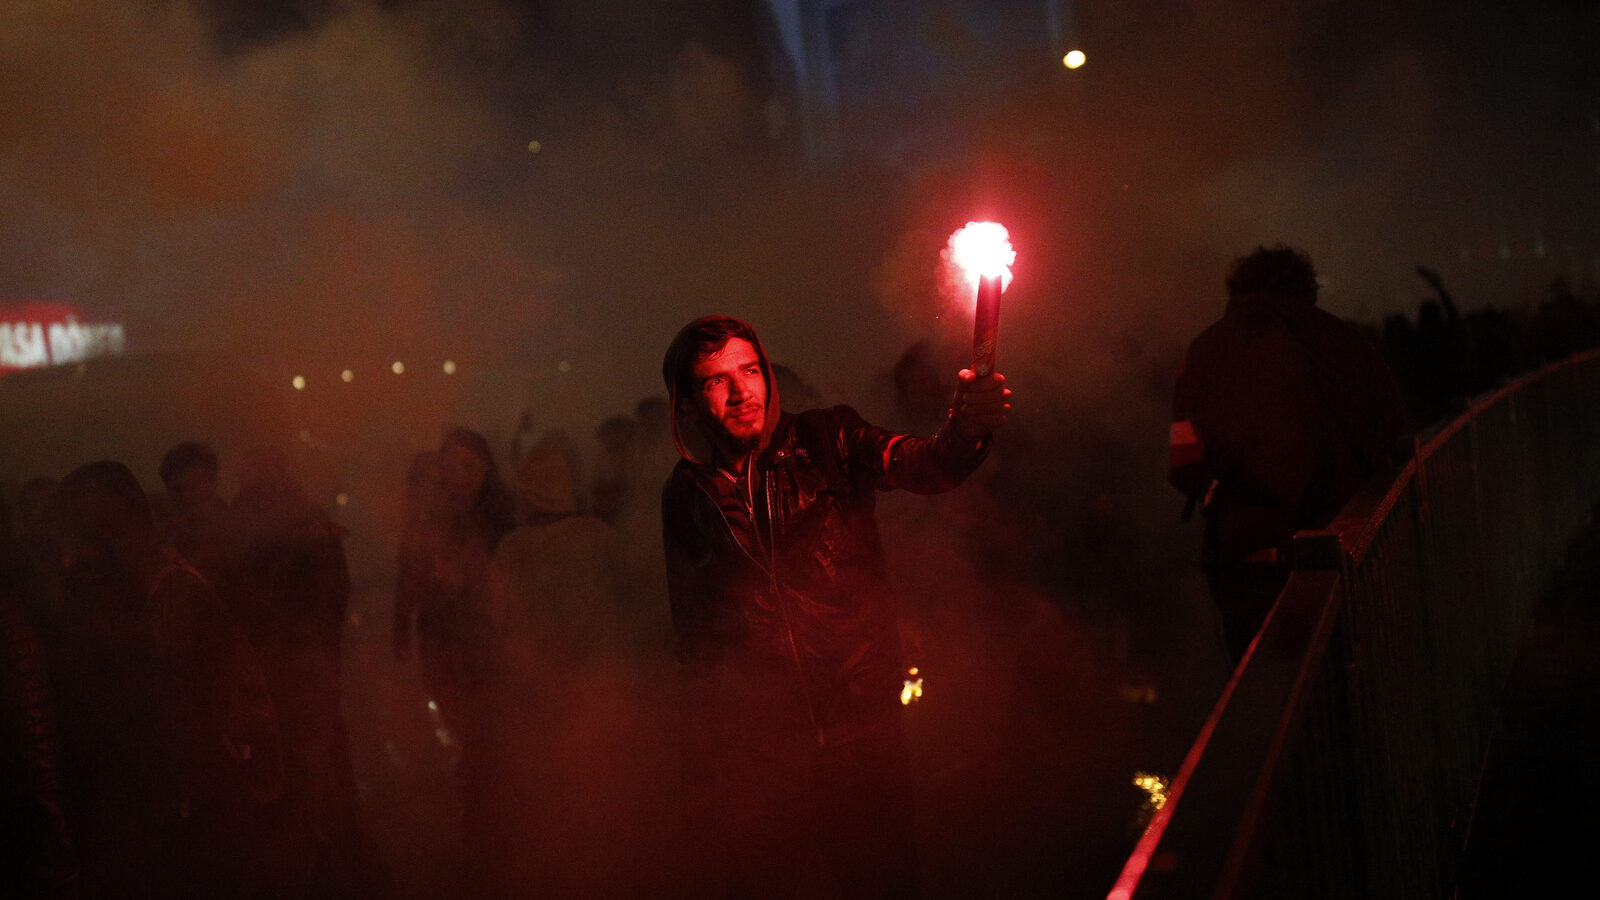 A supporter of the 'no' vote lights a flare during a protest in Istanbul, against the referendum outcome, Monday, April 17, 2017. Turkey's main opposition party urged the country's electoral board Monday to cancel the results of a landmark referendum that granted sweeping new powers to Erdogan, citing what it called substantial voting irregularities. (AP/Emrah Gurel)